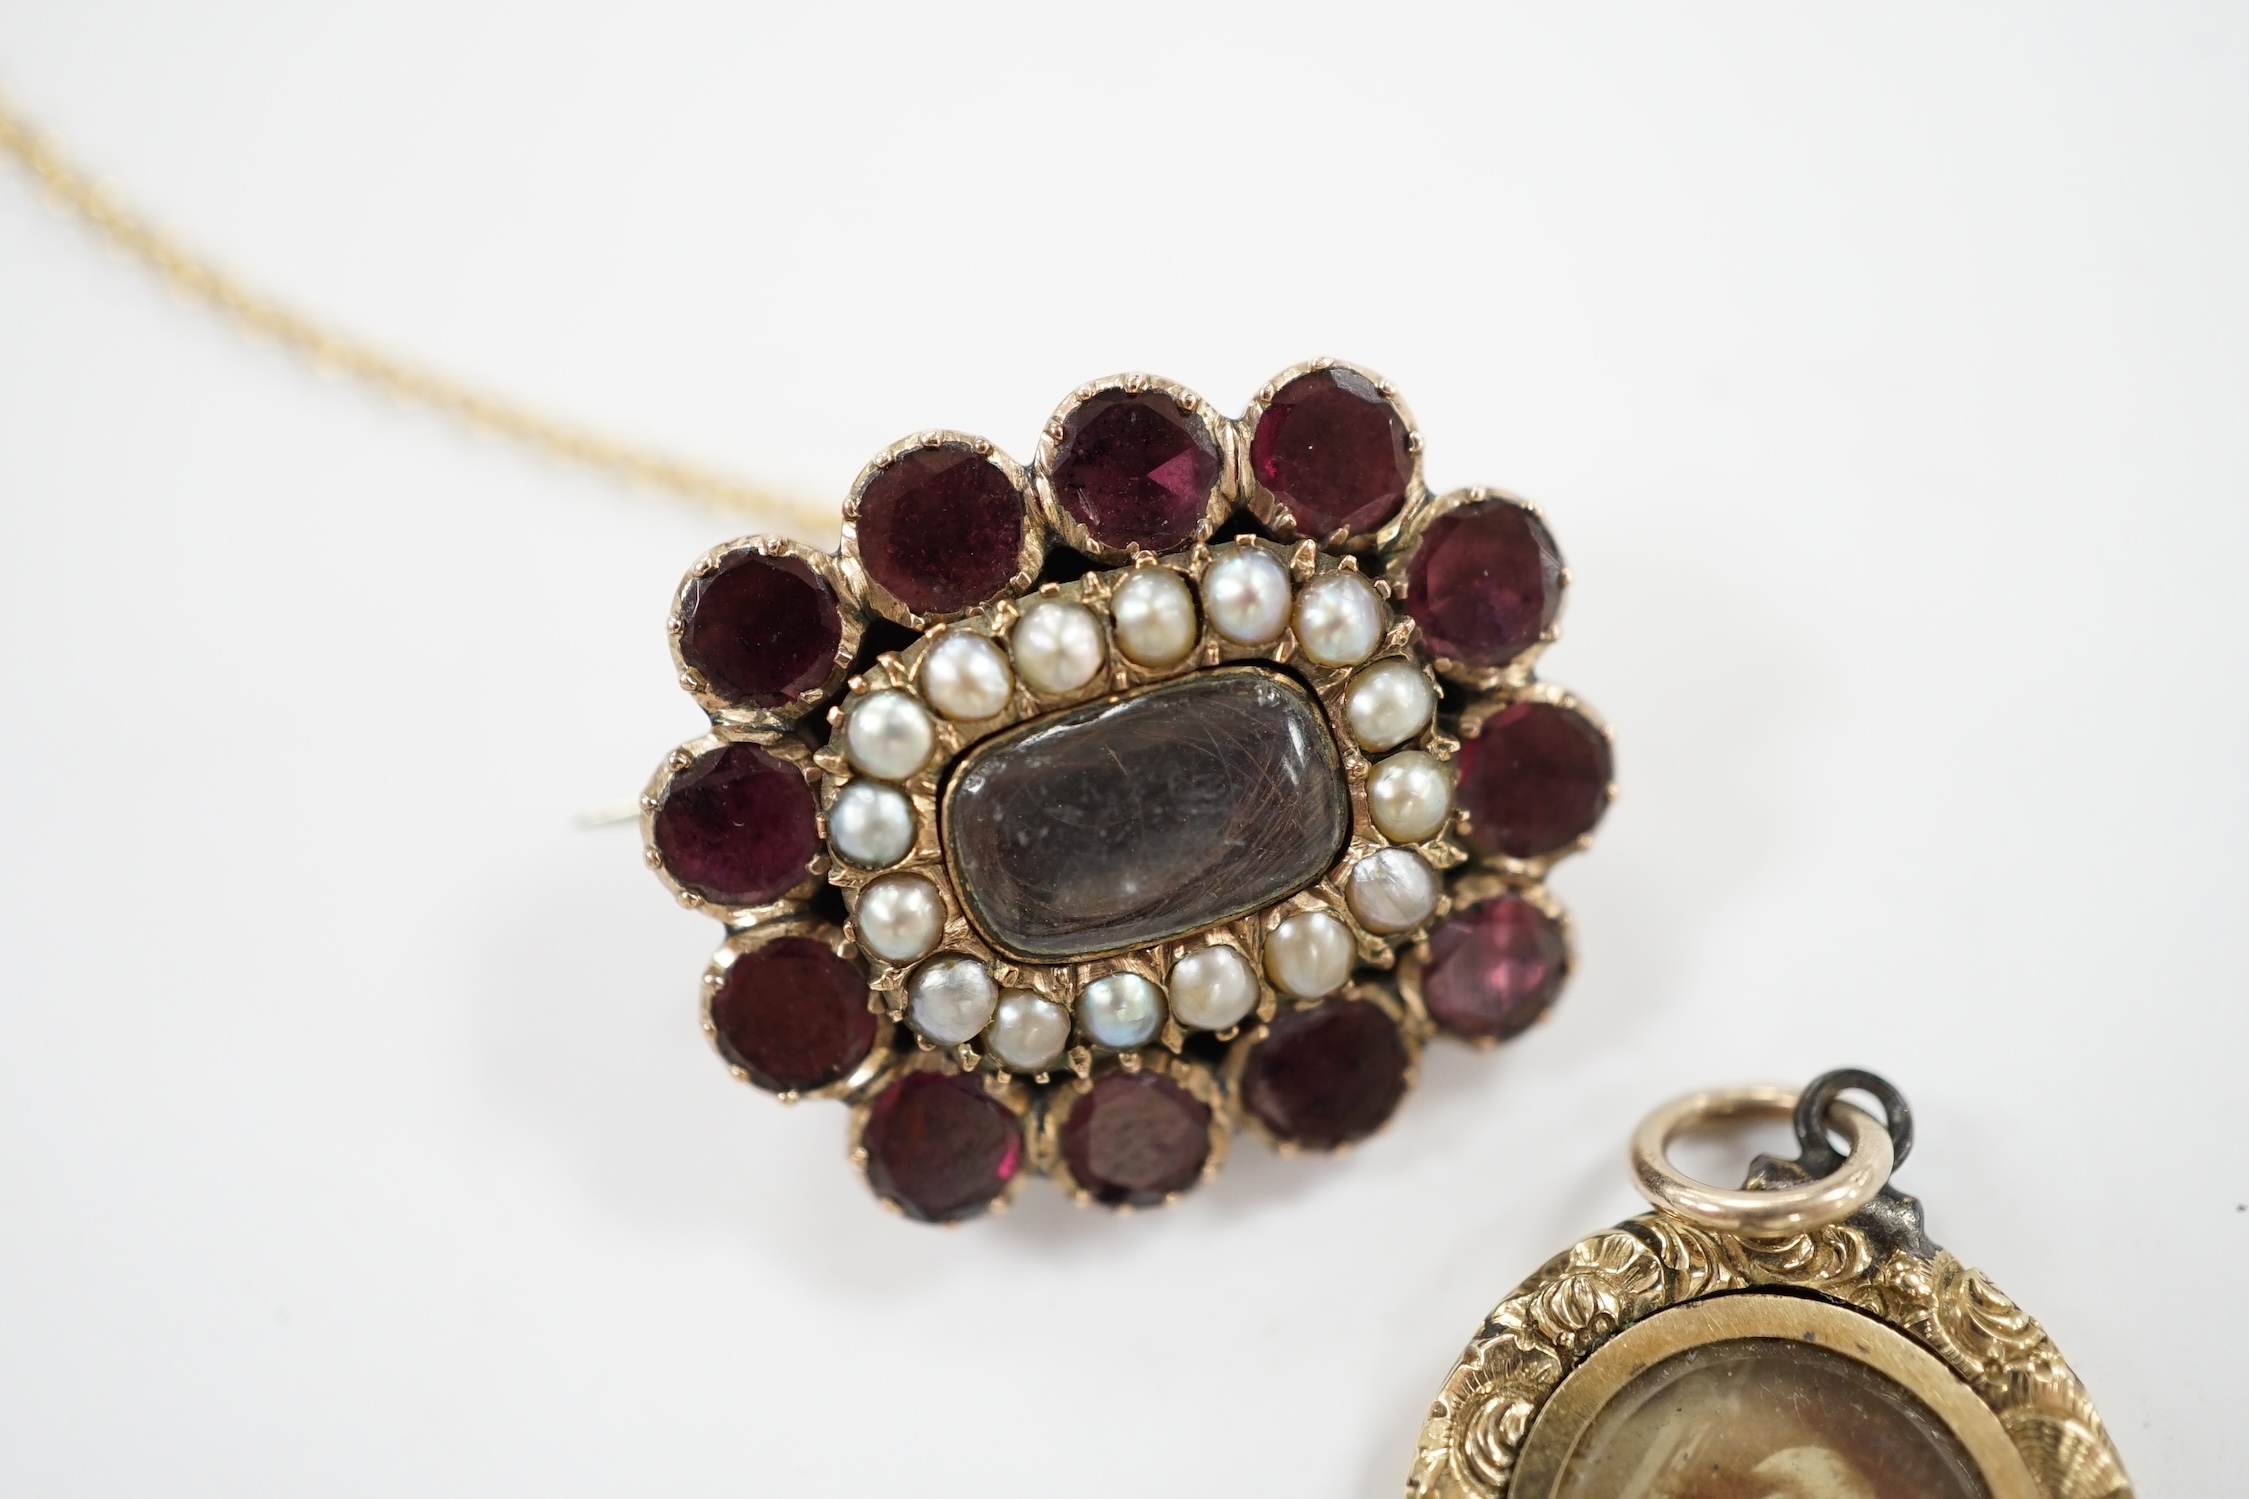 An early Victorian yellow metal, garnet and split pearl set mourning brooch, with engraved monogram, 23mm and a George IV mourning locket, inscribed 'Martha Lloyd, ob. 8th May, 1824 at 53'. Condition - fair